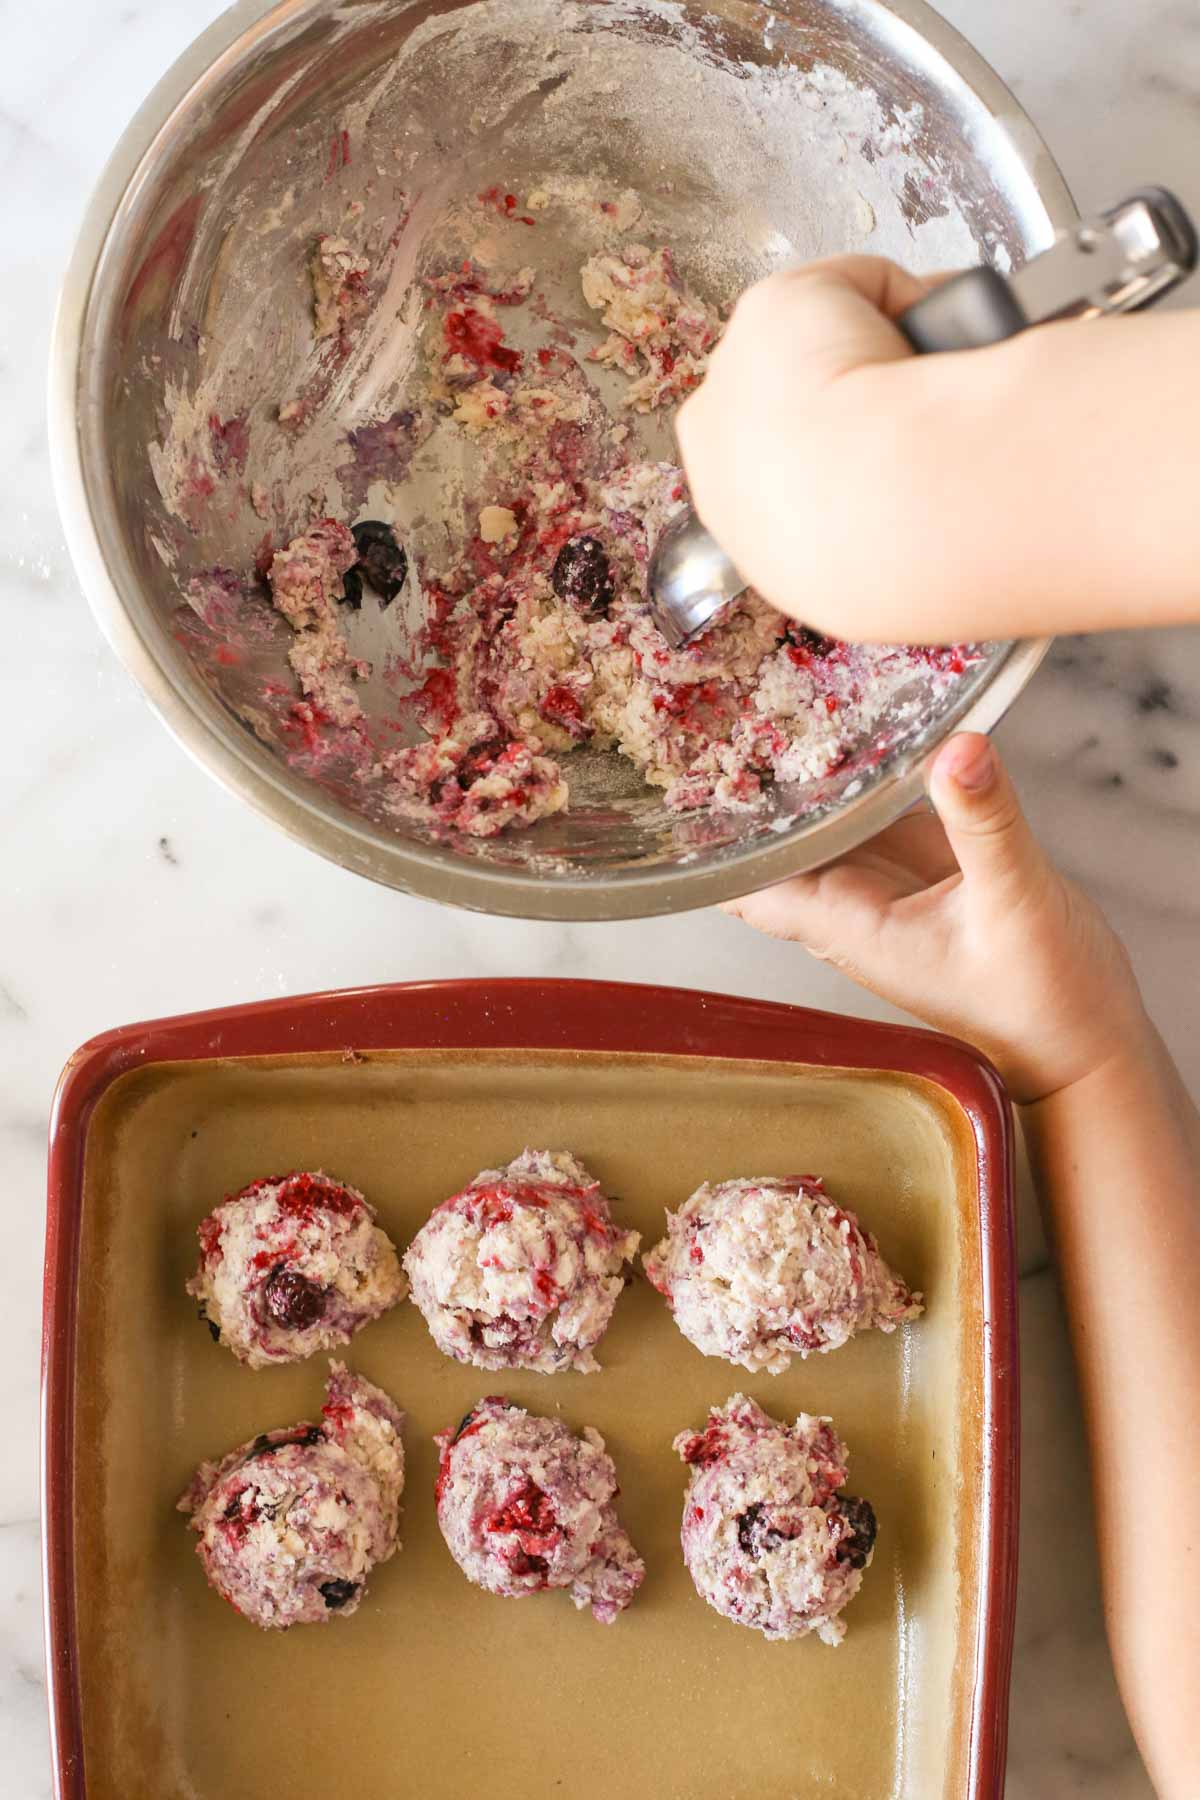 Overhead shot of a hand scooping out the Glazed Berry Drop Biscuit dough from a mixing bowl that is sitting next to a baking pan that has six Glazed Berry Drop Biscuit dough mounds in it.   